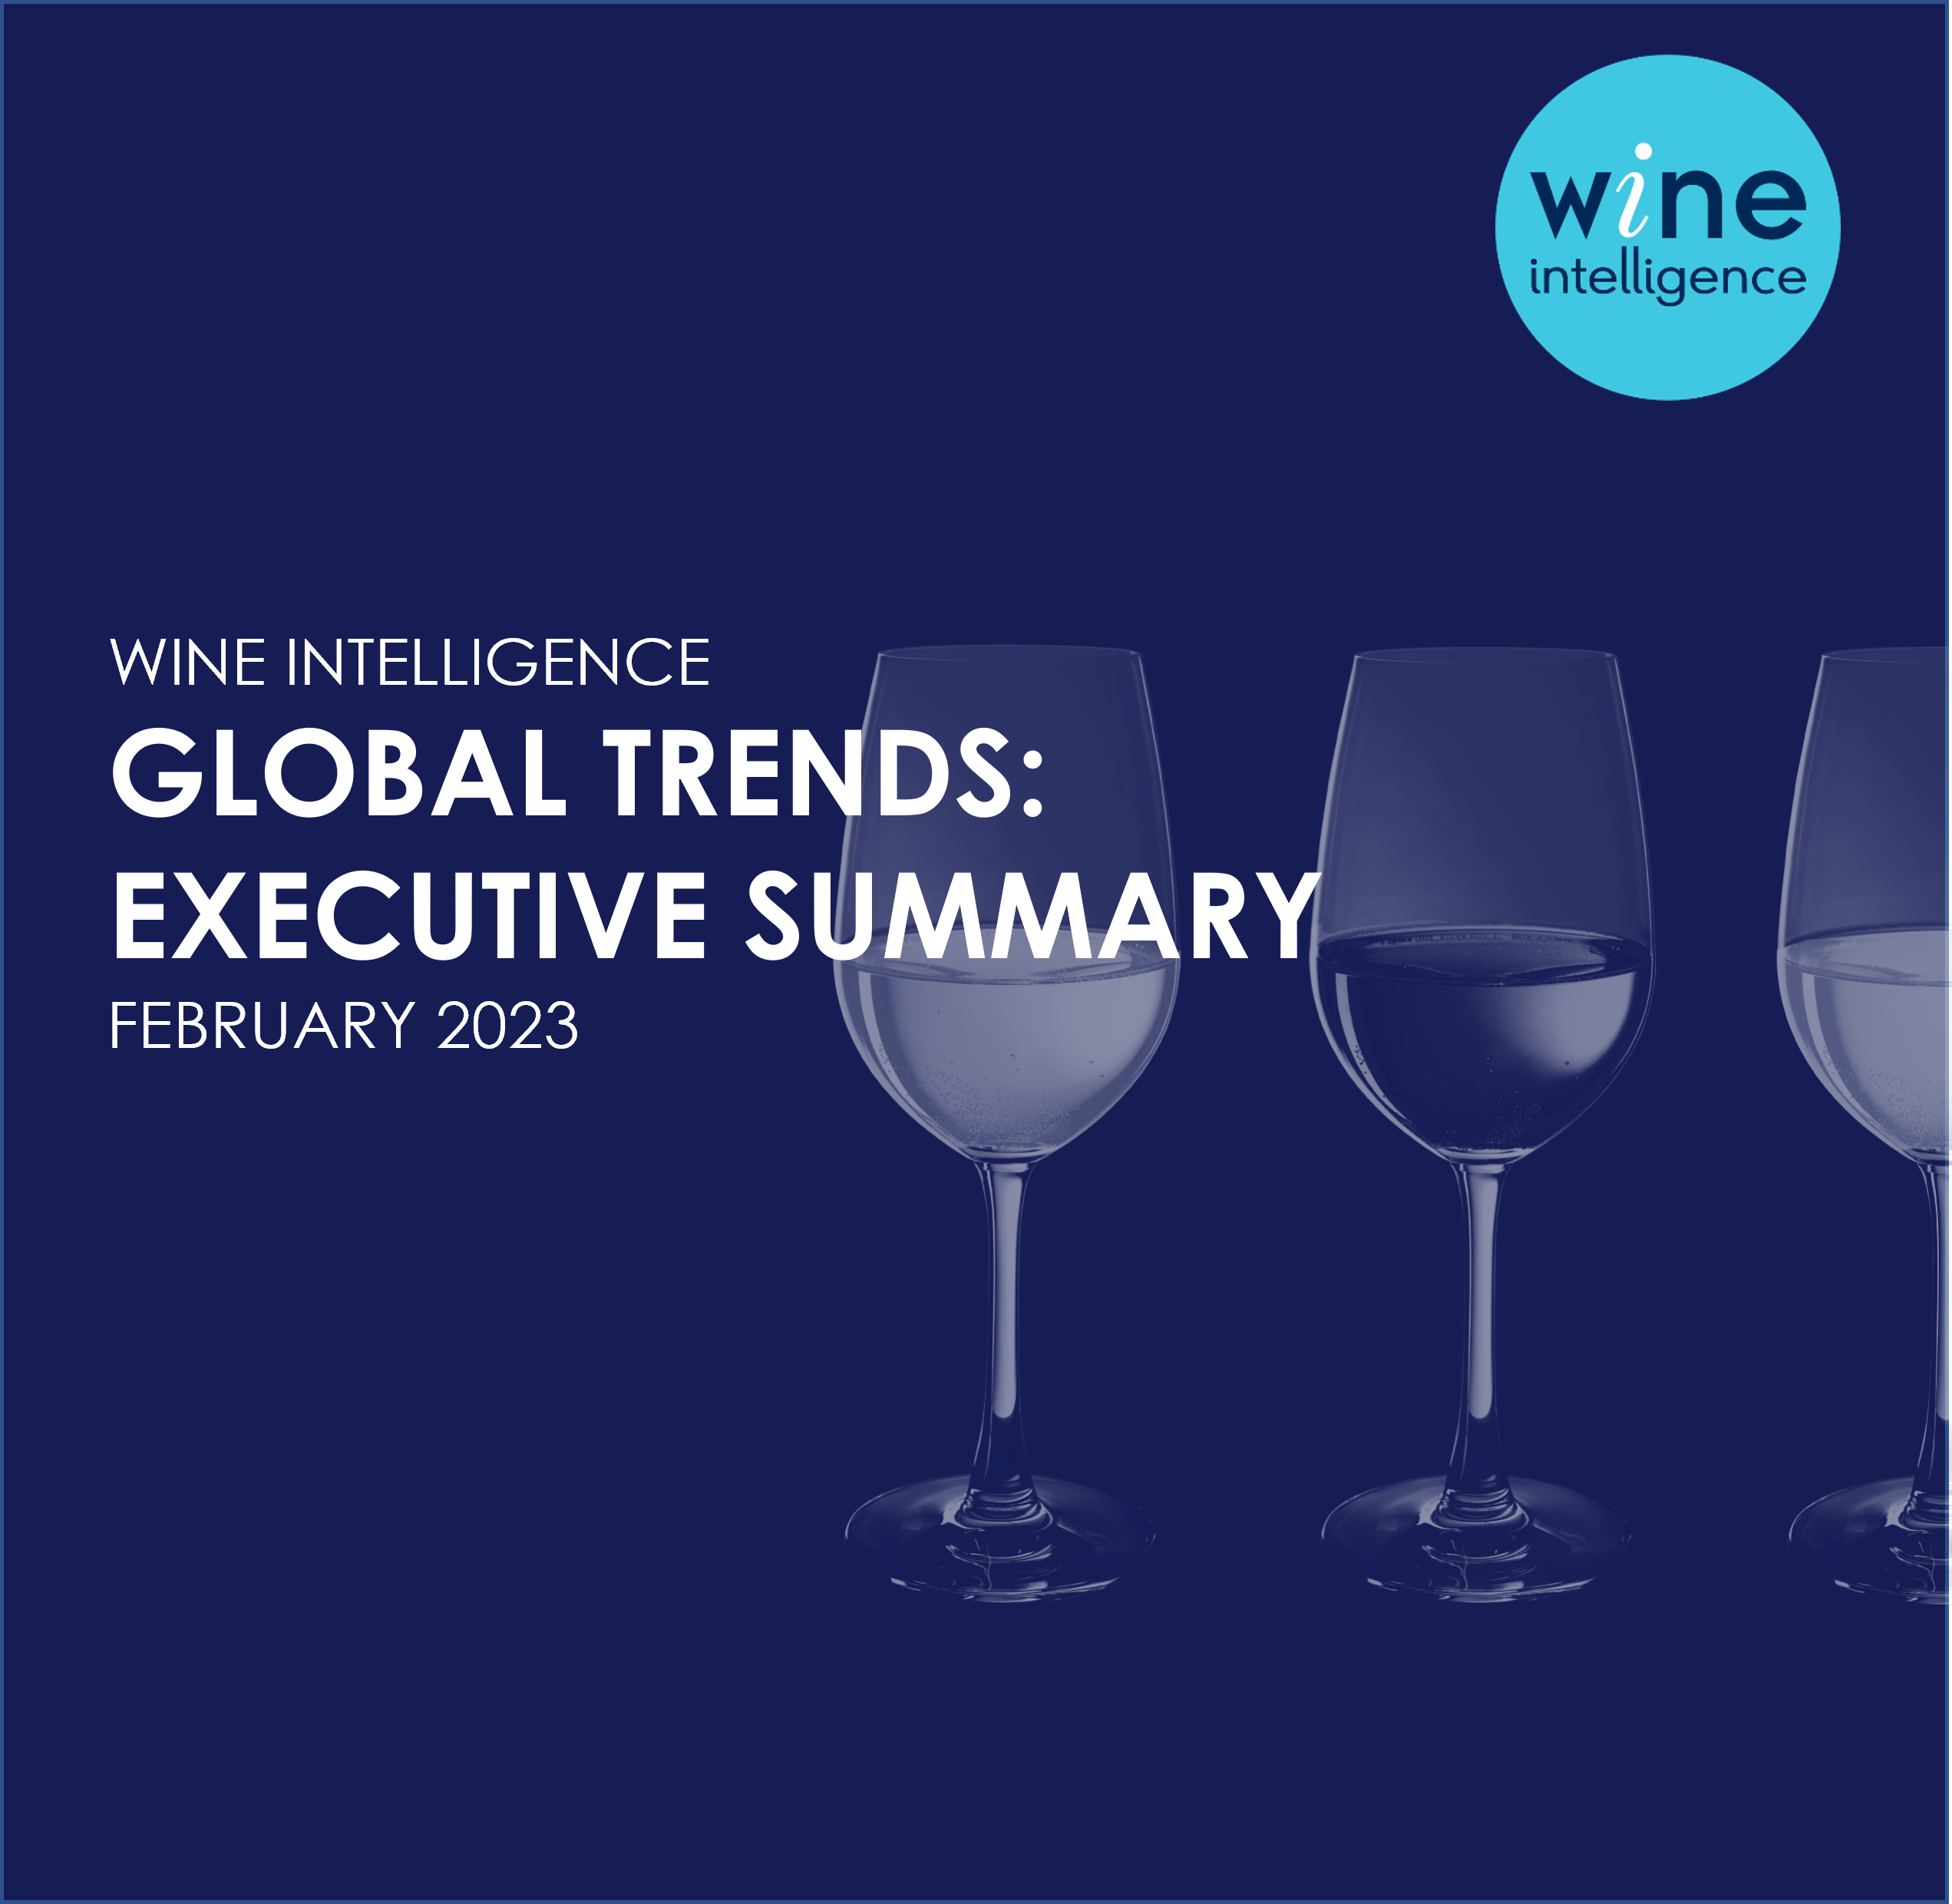 Global Trends Execuitve Summary 2022 - Full Download Access